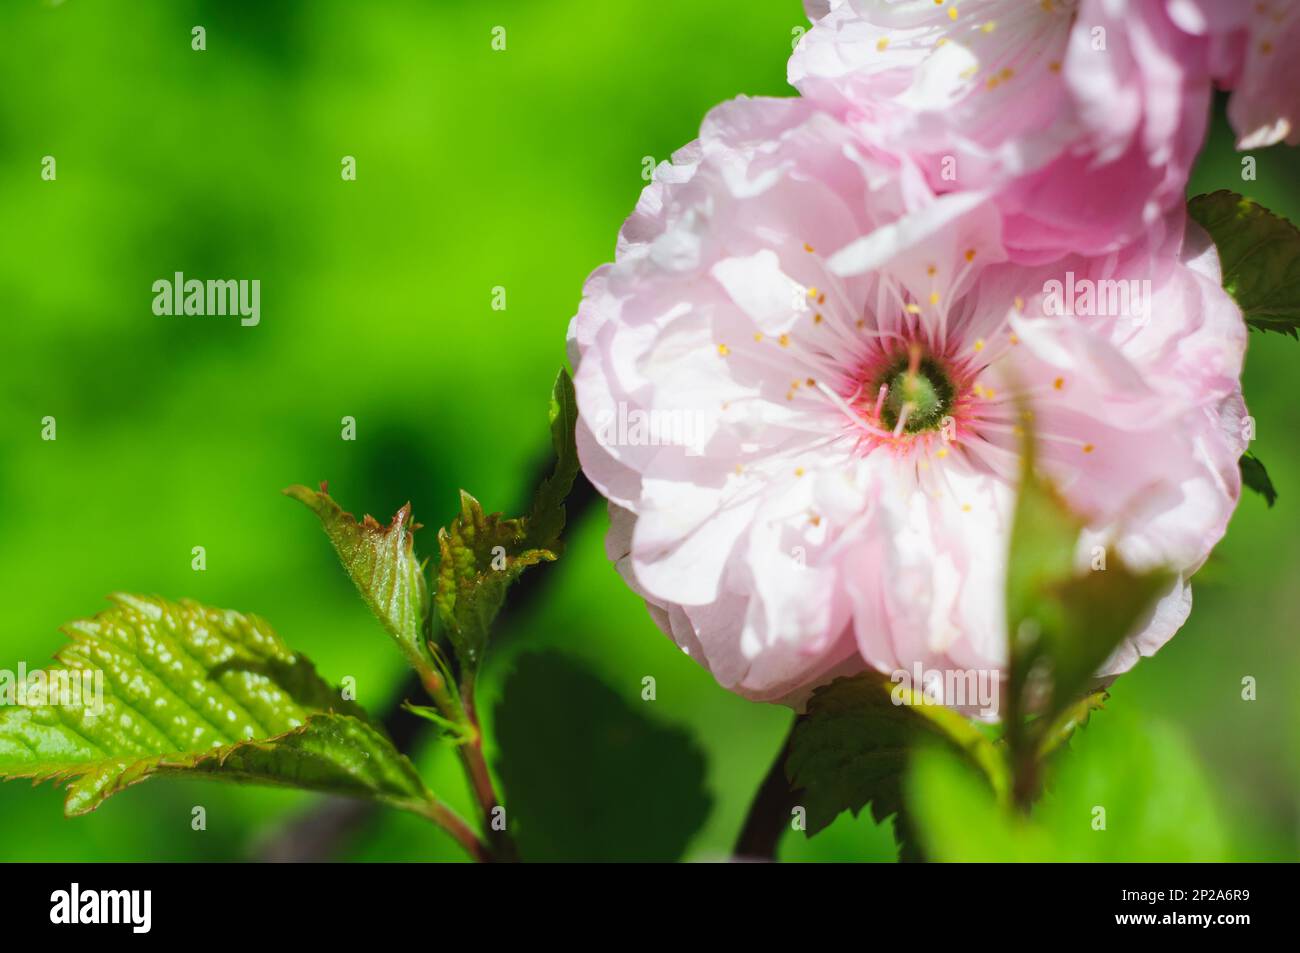 Lush pink amygdalus flower on green blurred background. Spring flowering of a decorative bush, bright sunlight Stock Photo